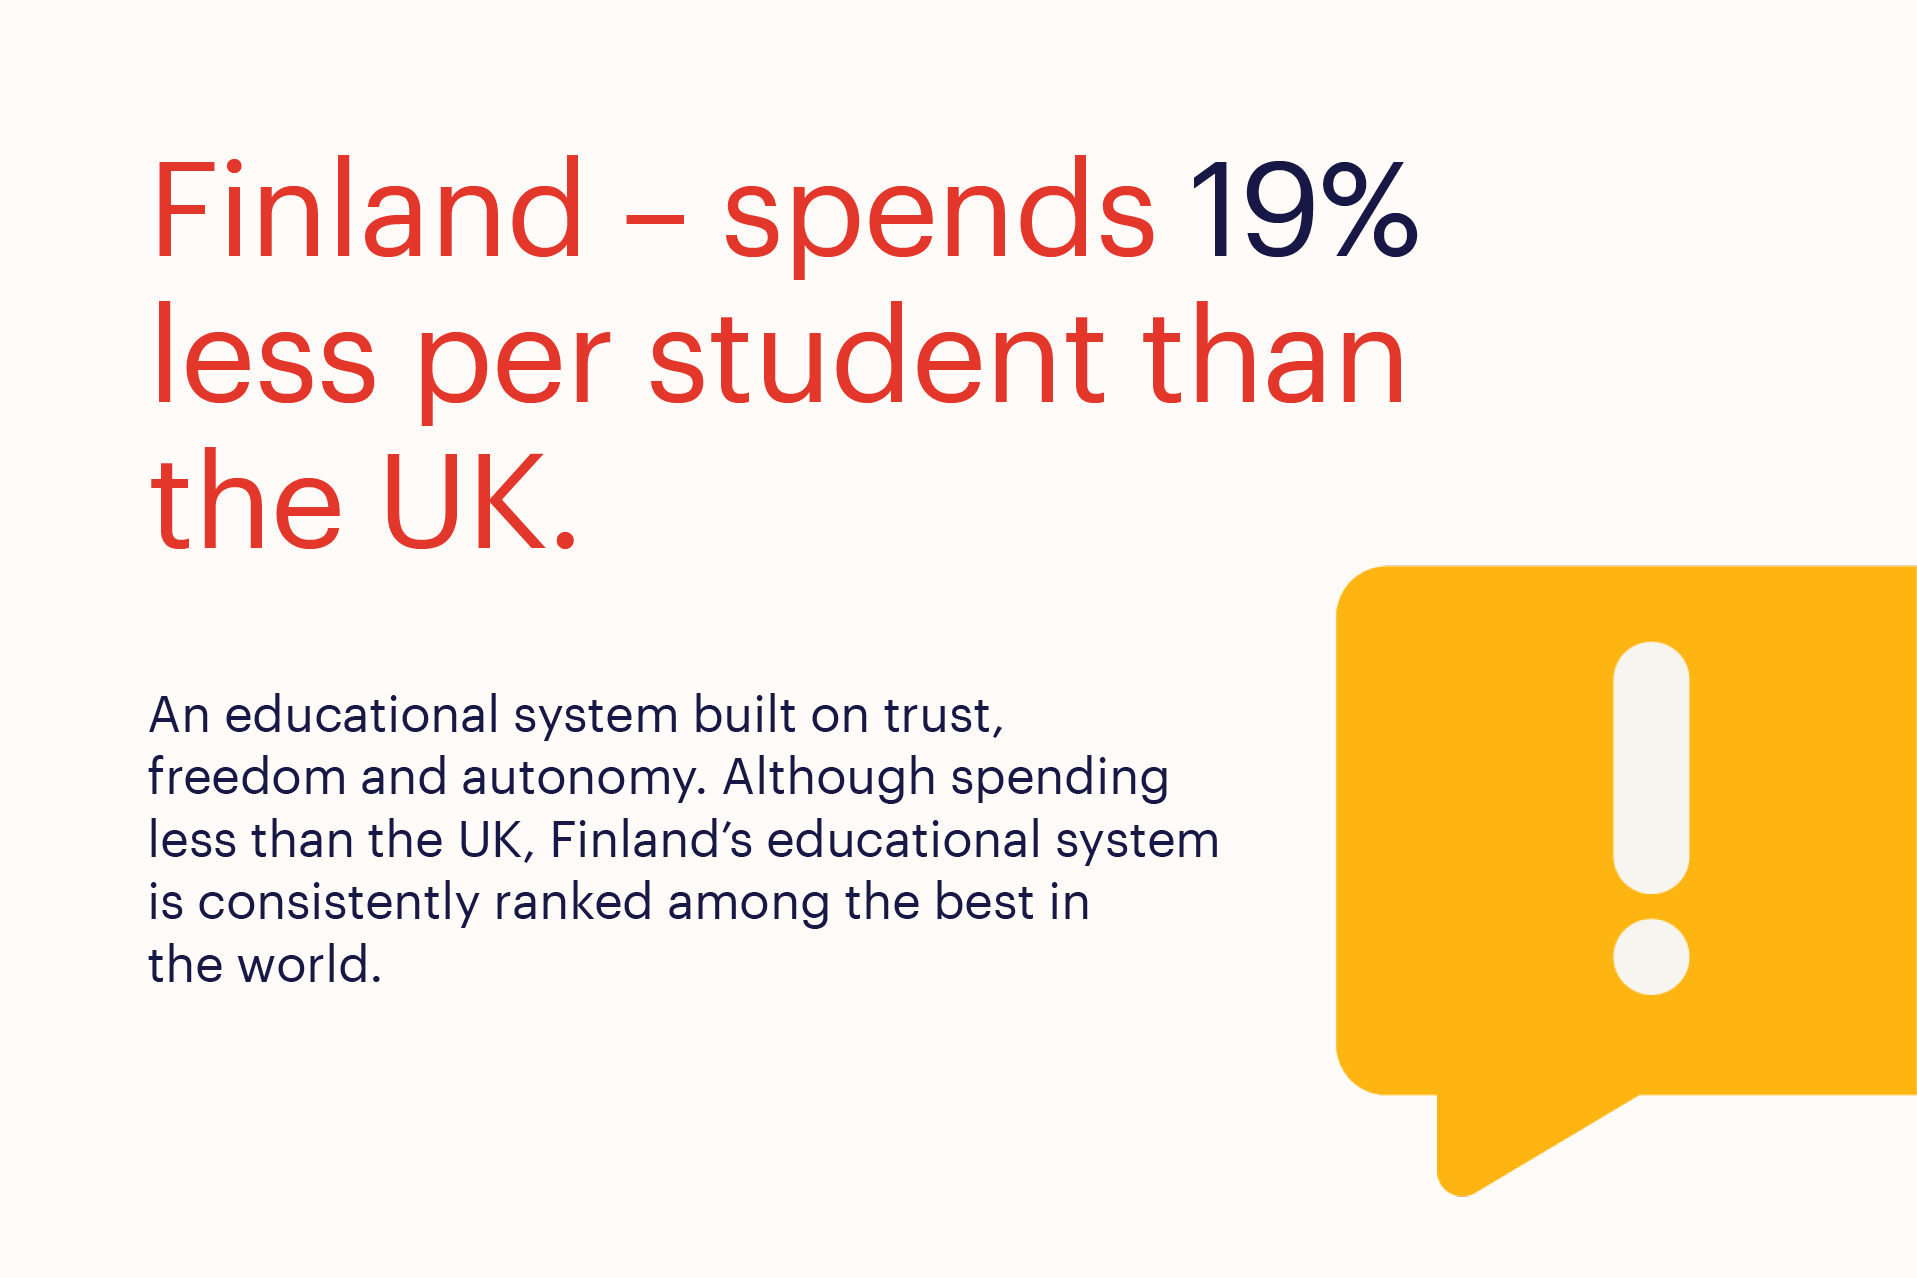 Finland spends 19% less per student than the UK.